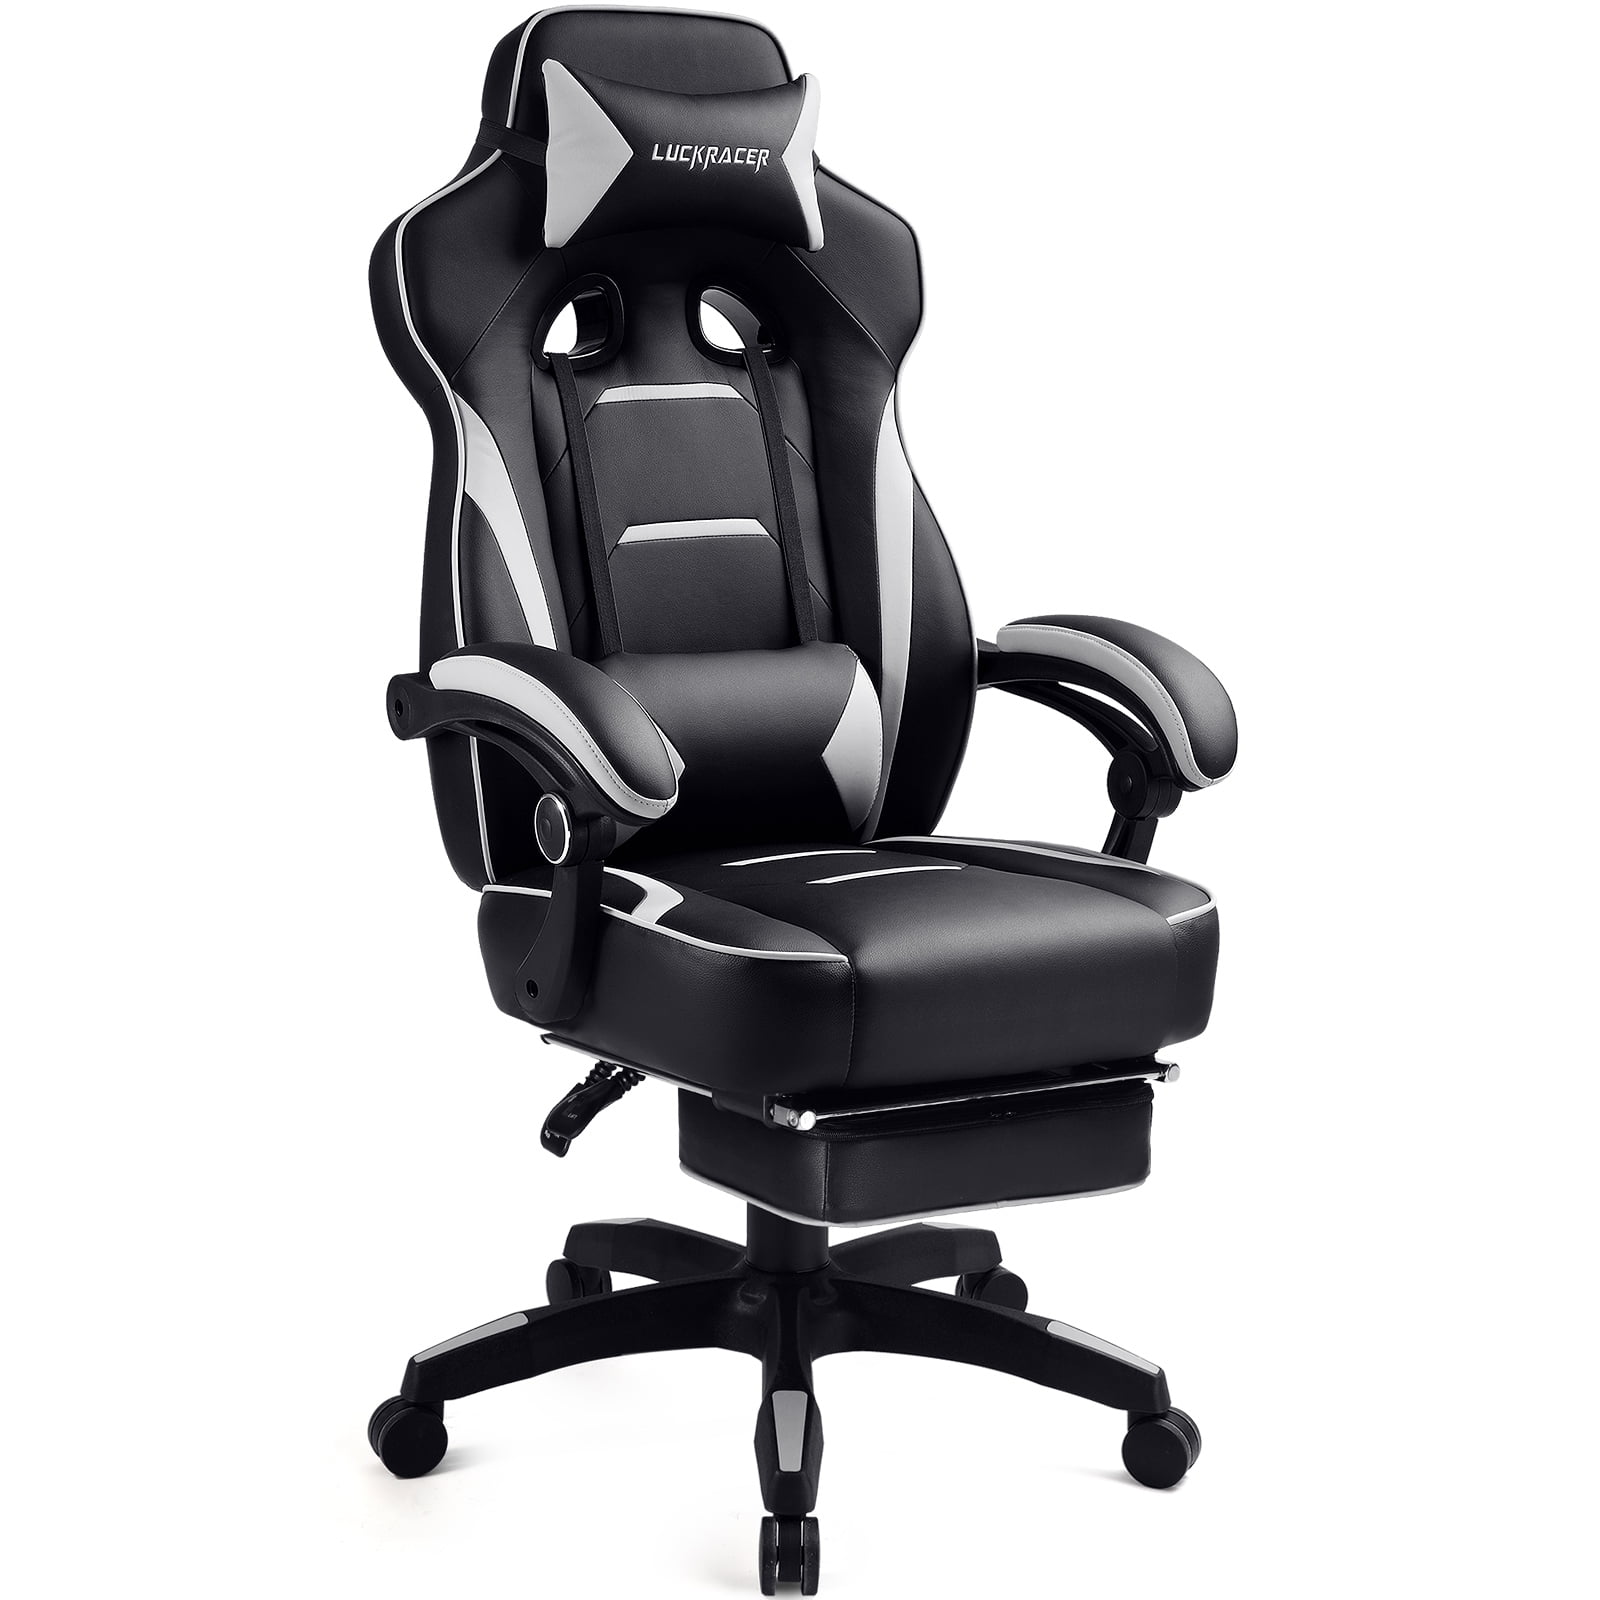 GTracing Executive Racing chair gaming chair Ergonomic PU Leather office desk 